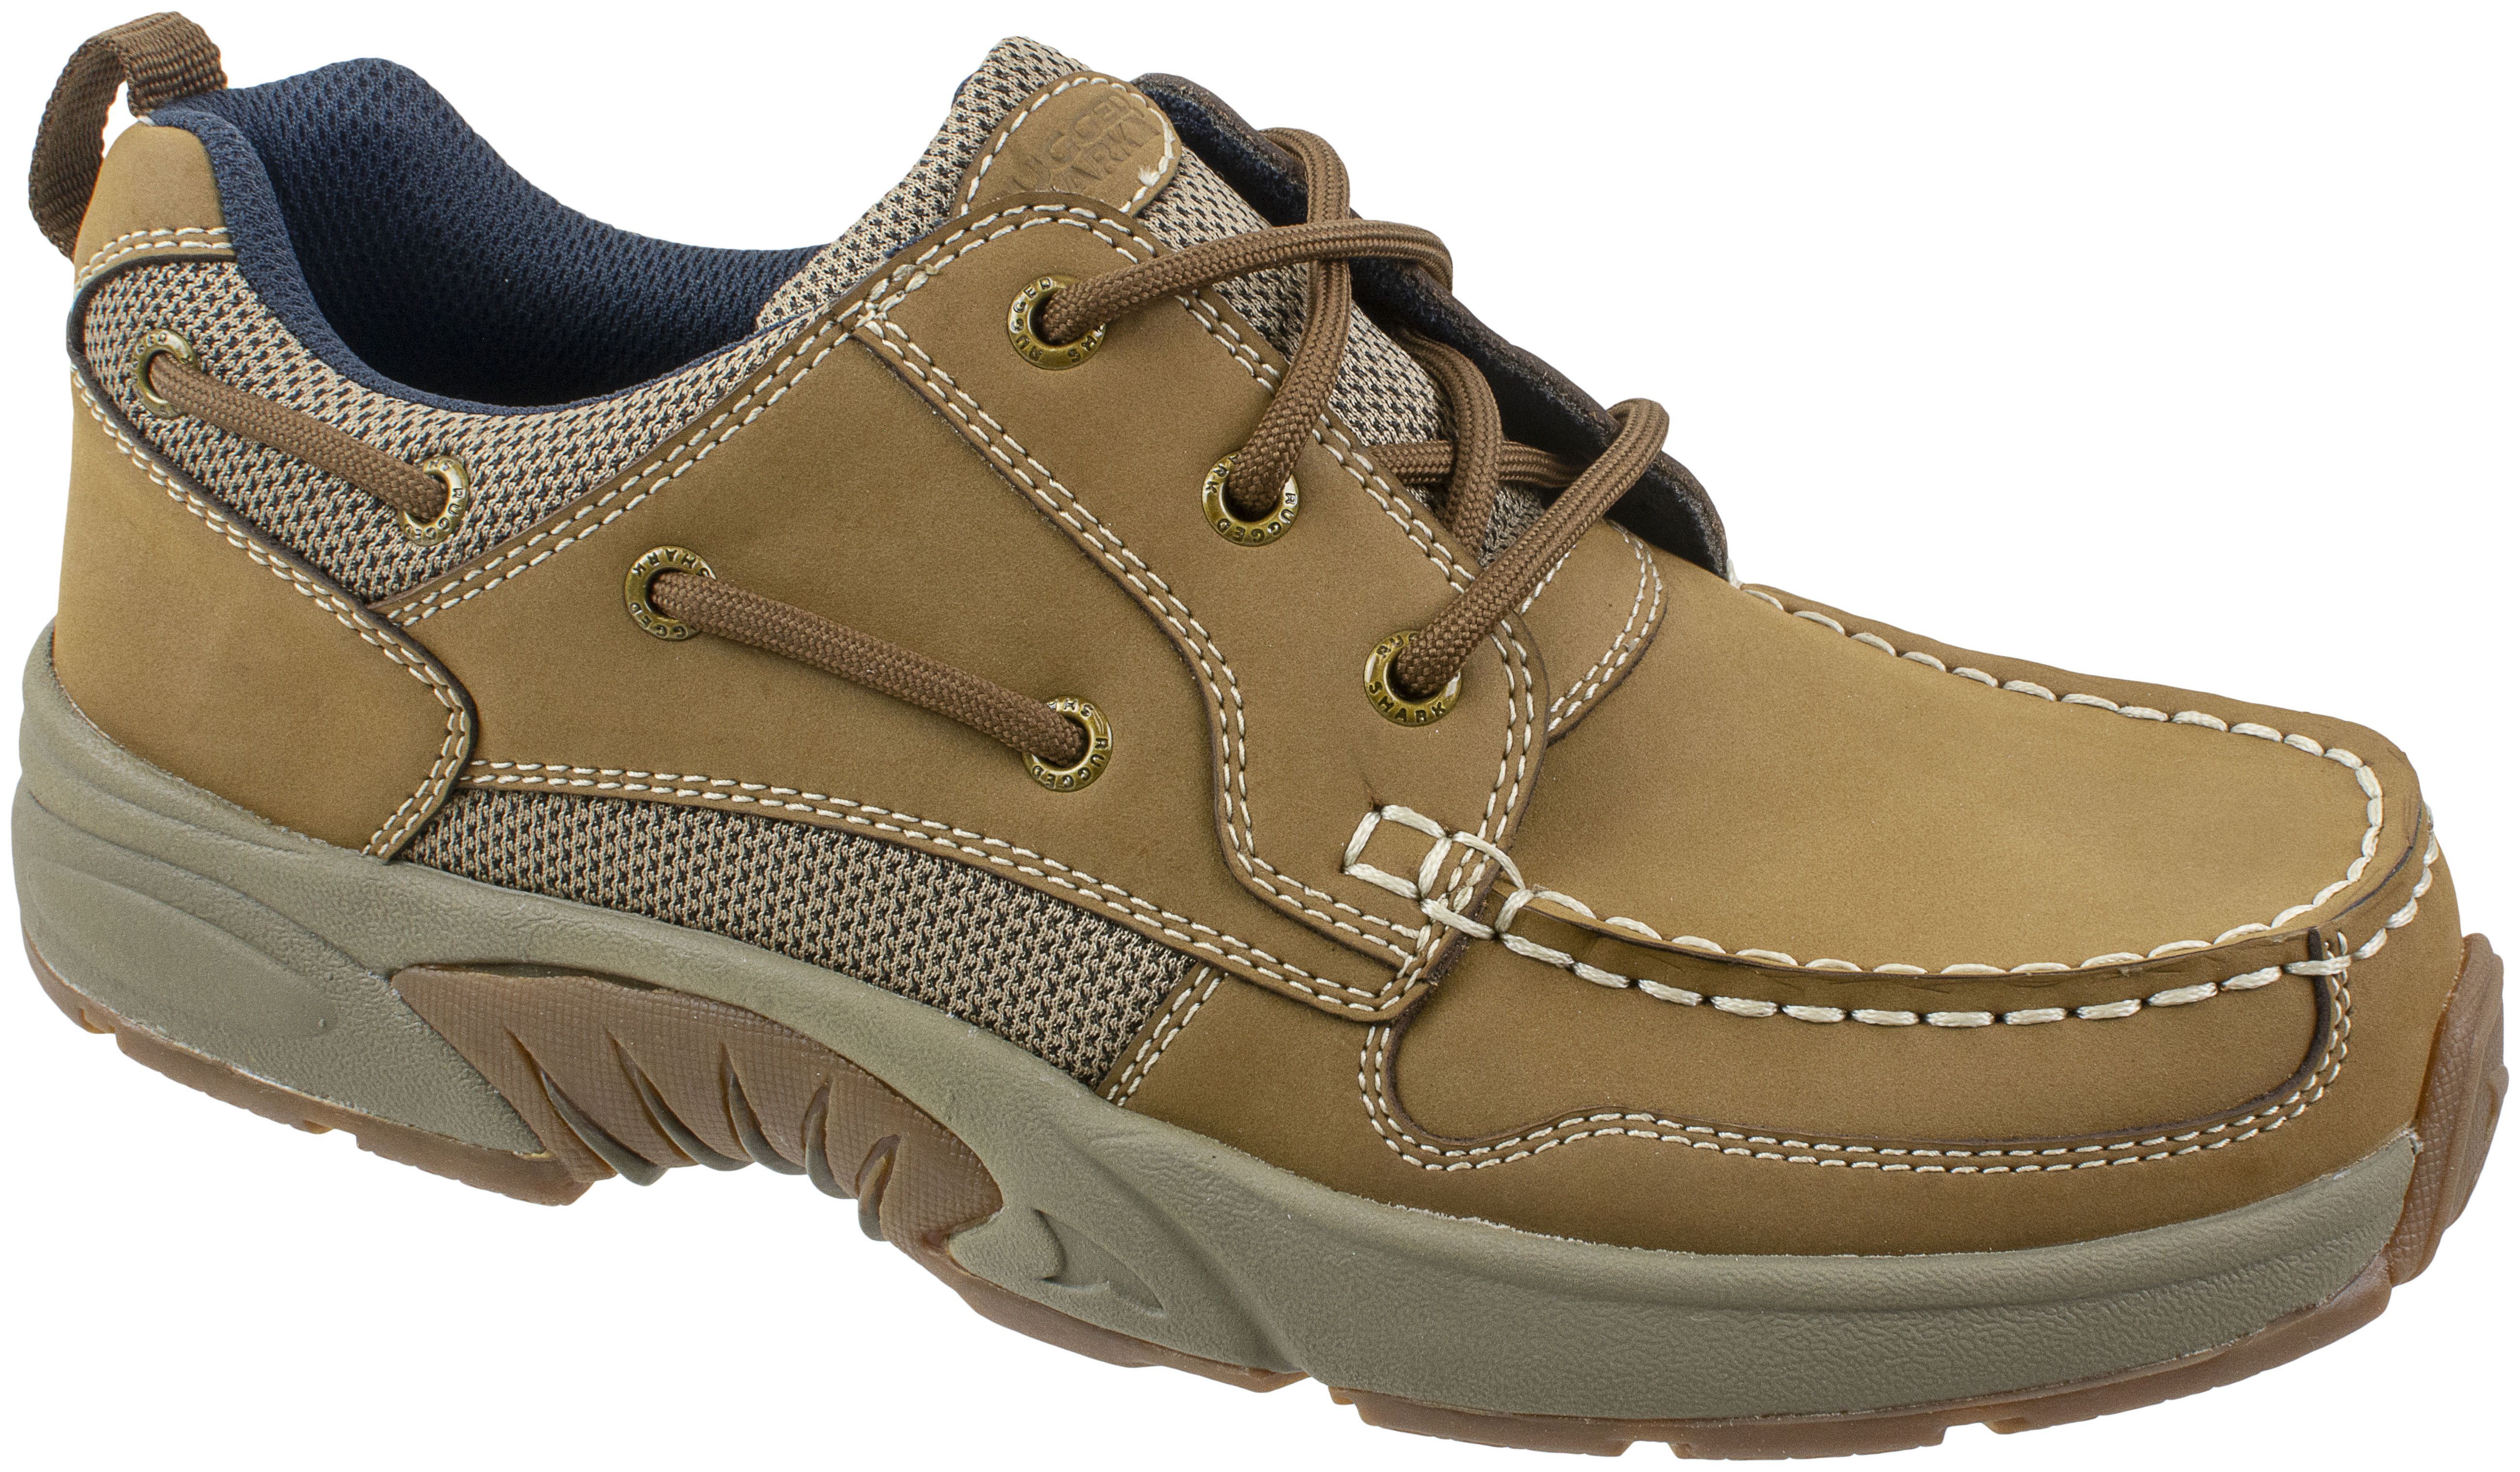 Goodyear Clipper Leather  Brown Boat Shoes